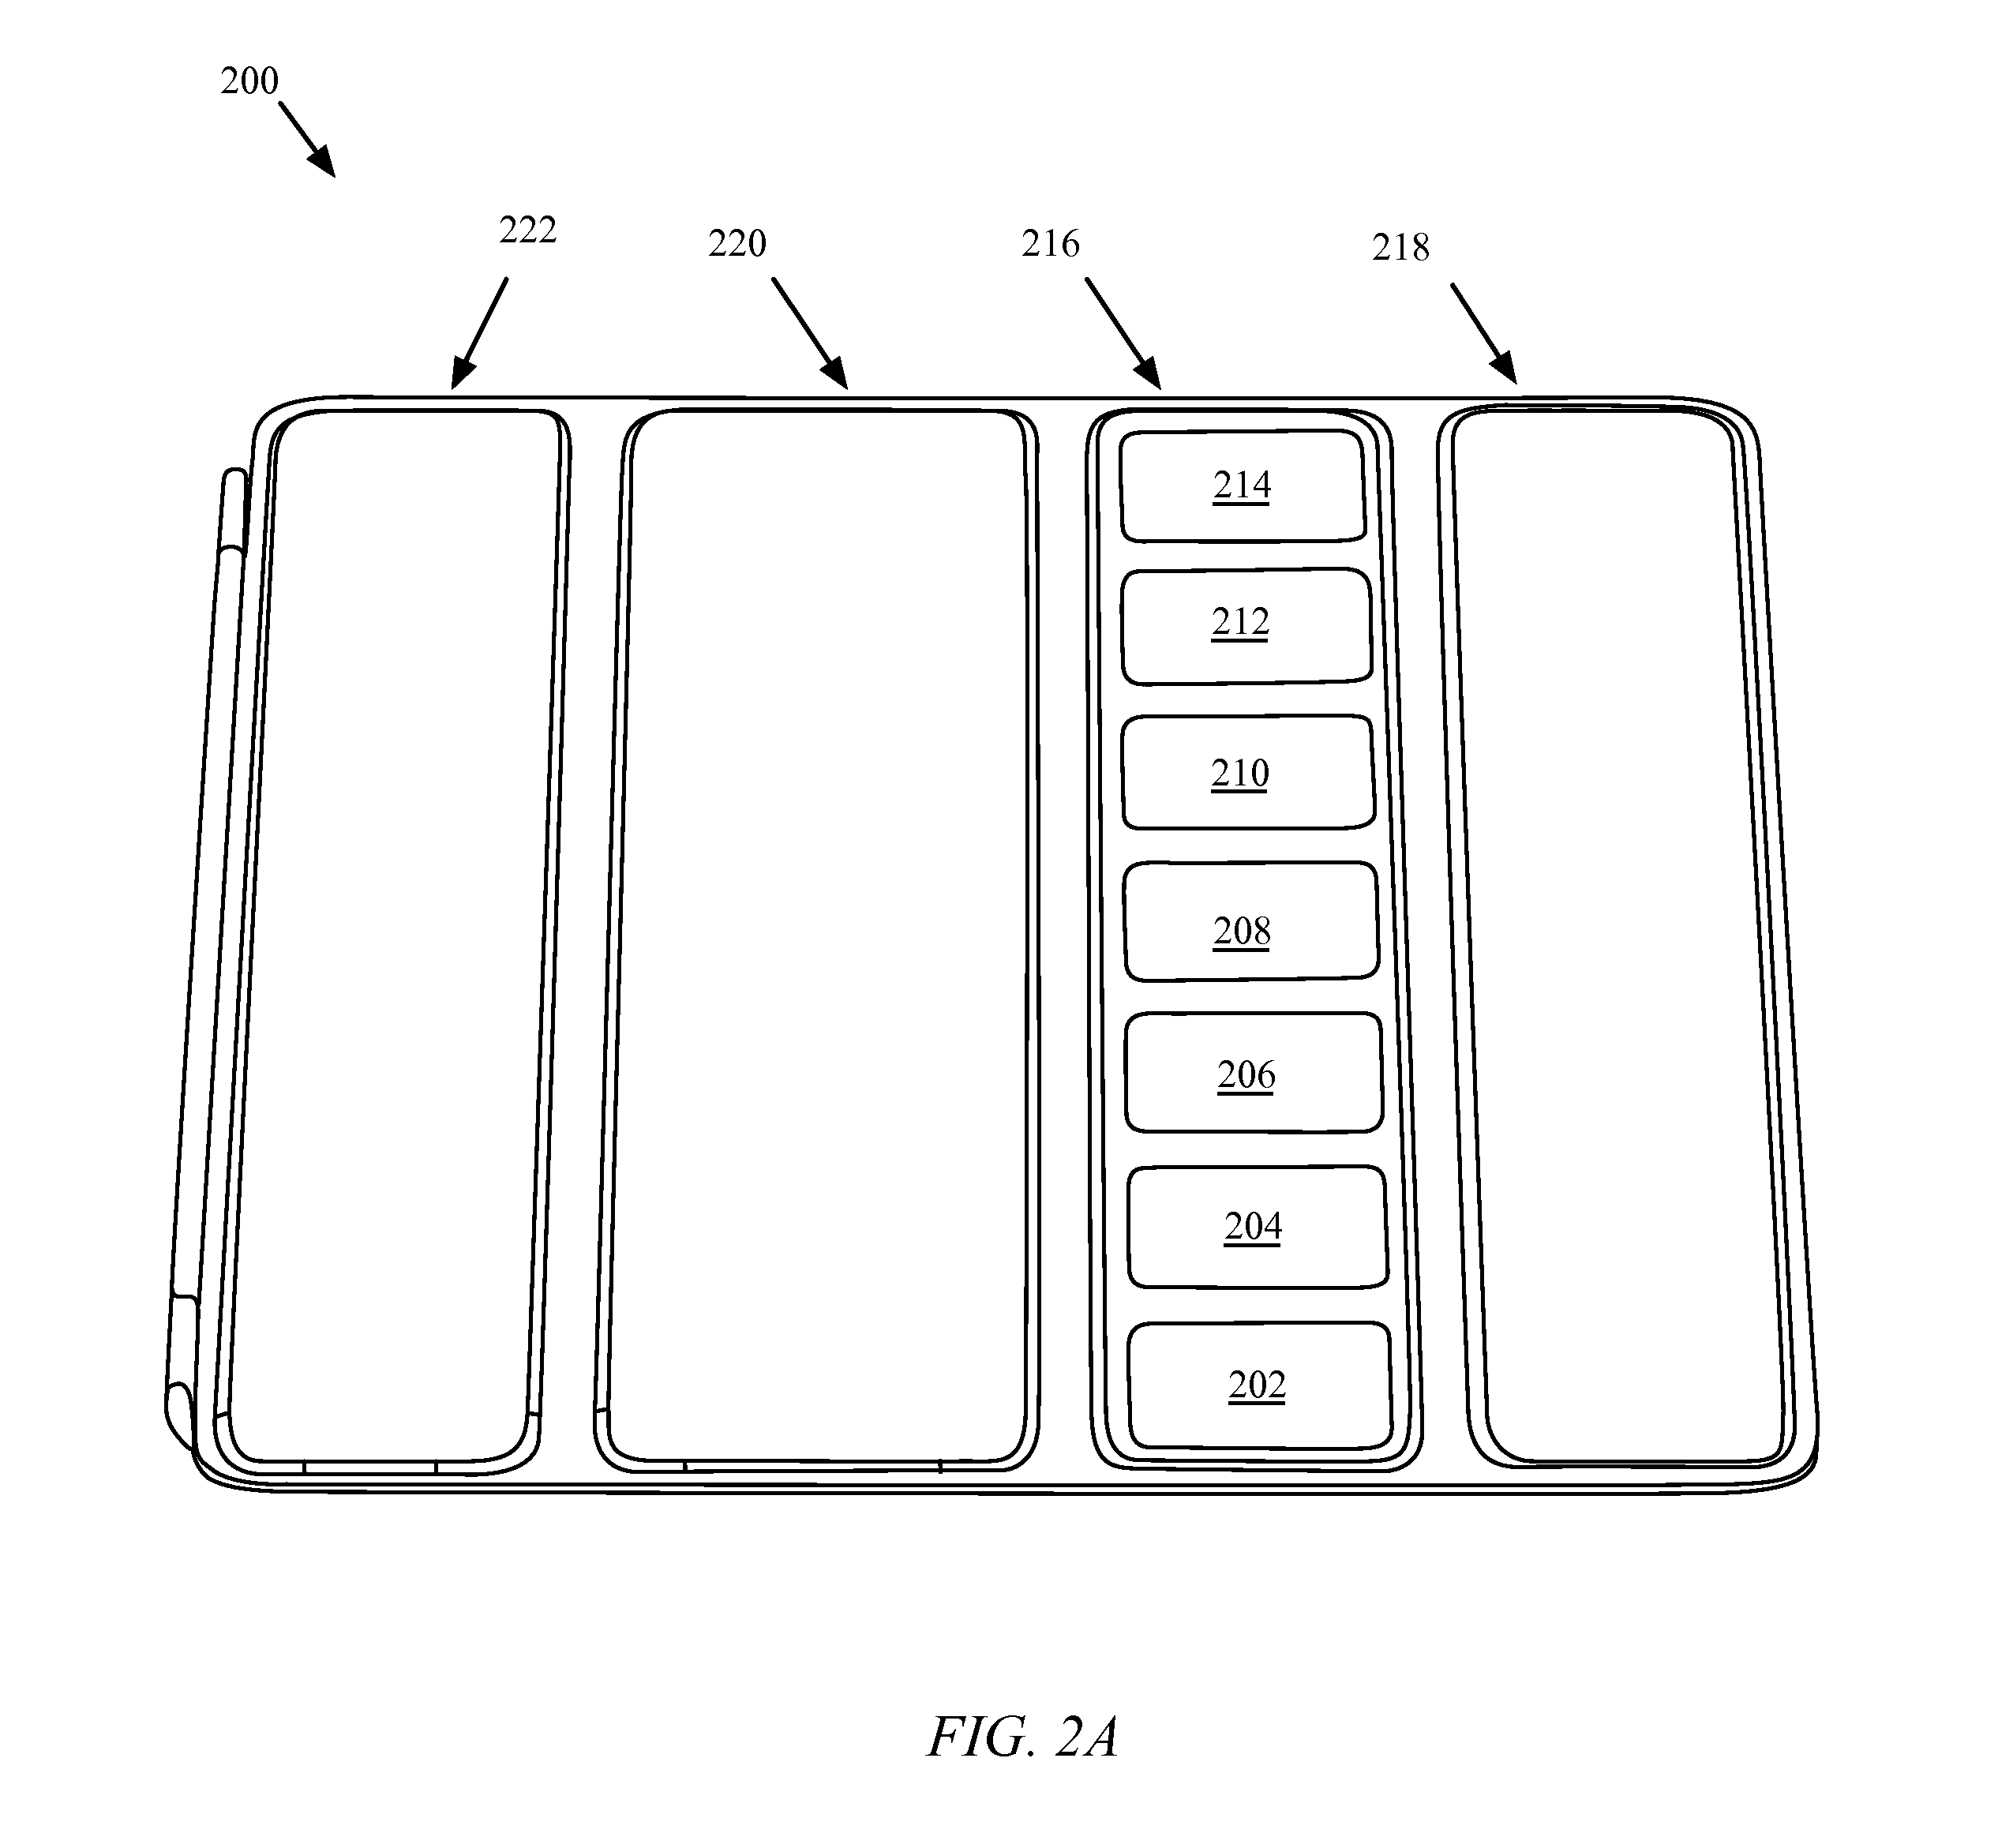 Integrated visual notification system in an accessory device